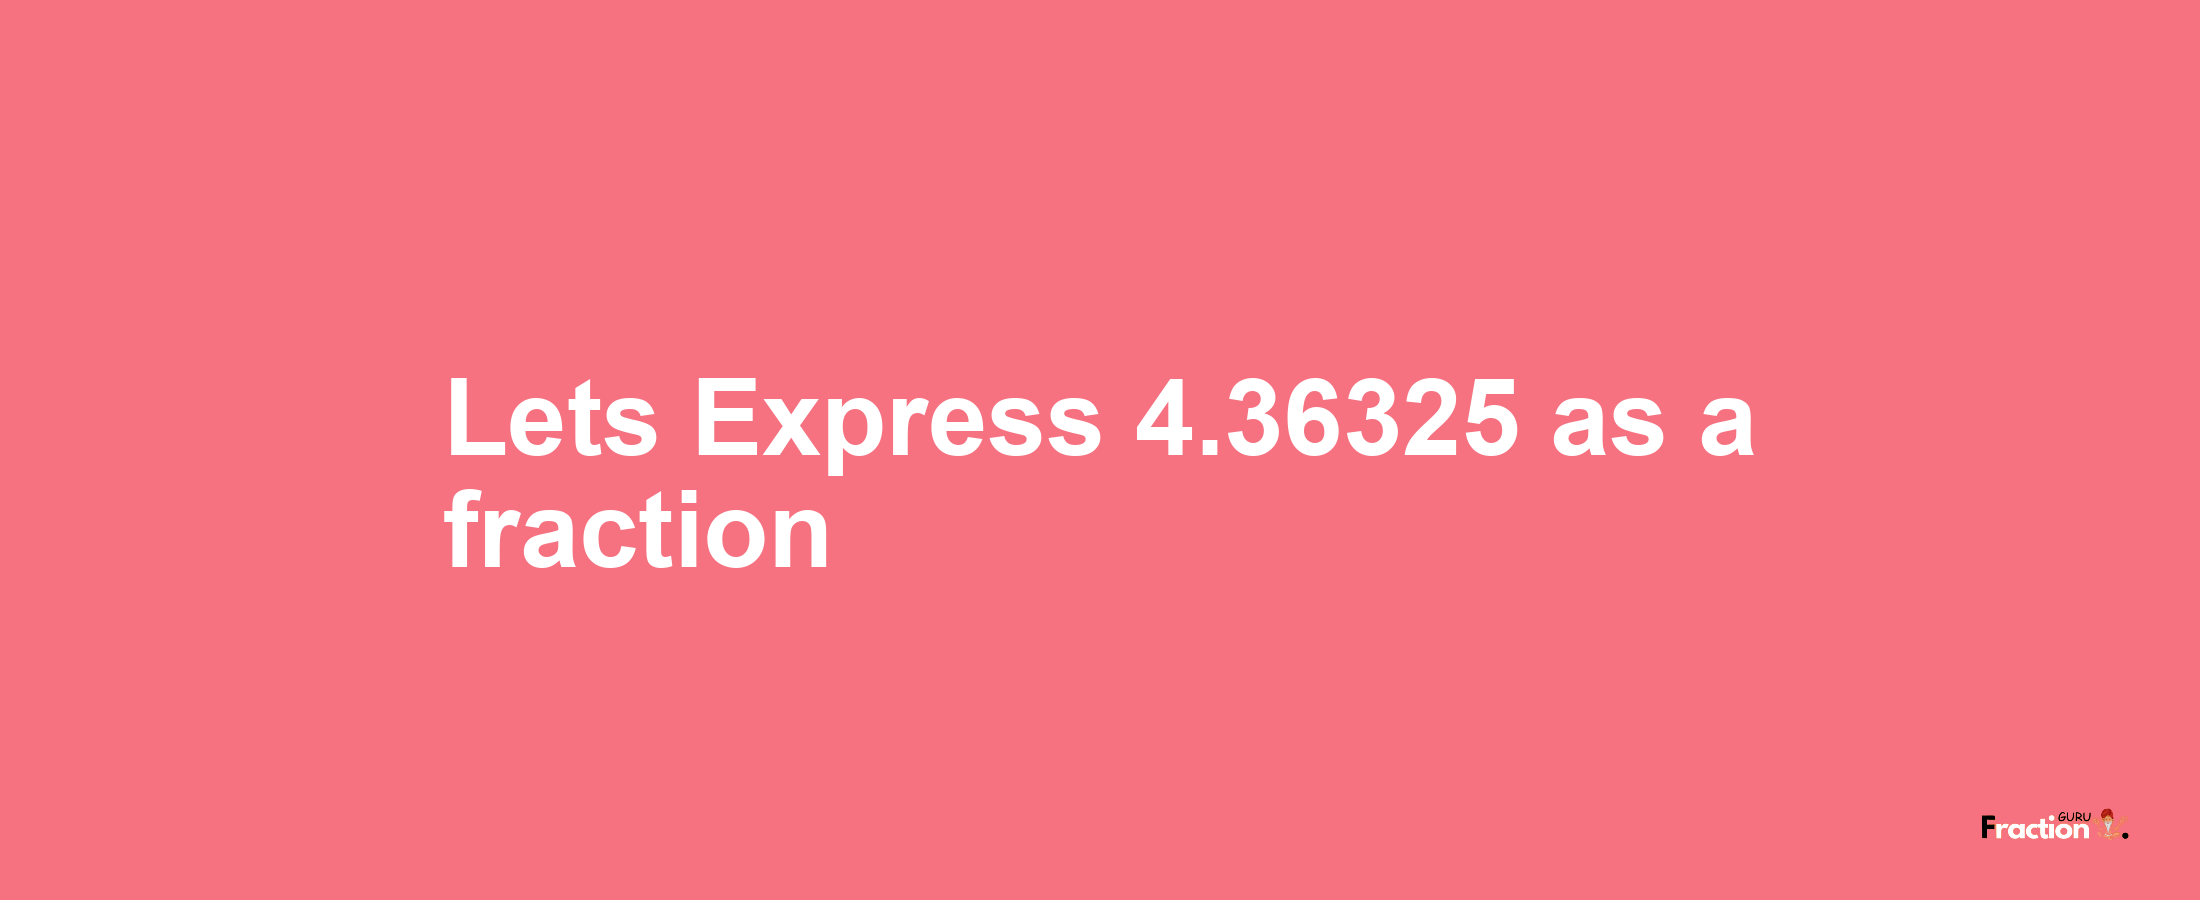 Lets Express 4.36325 as afraction